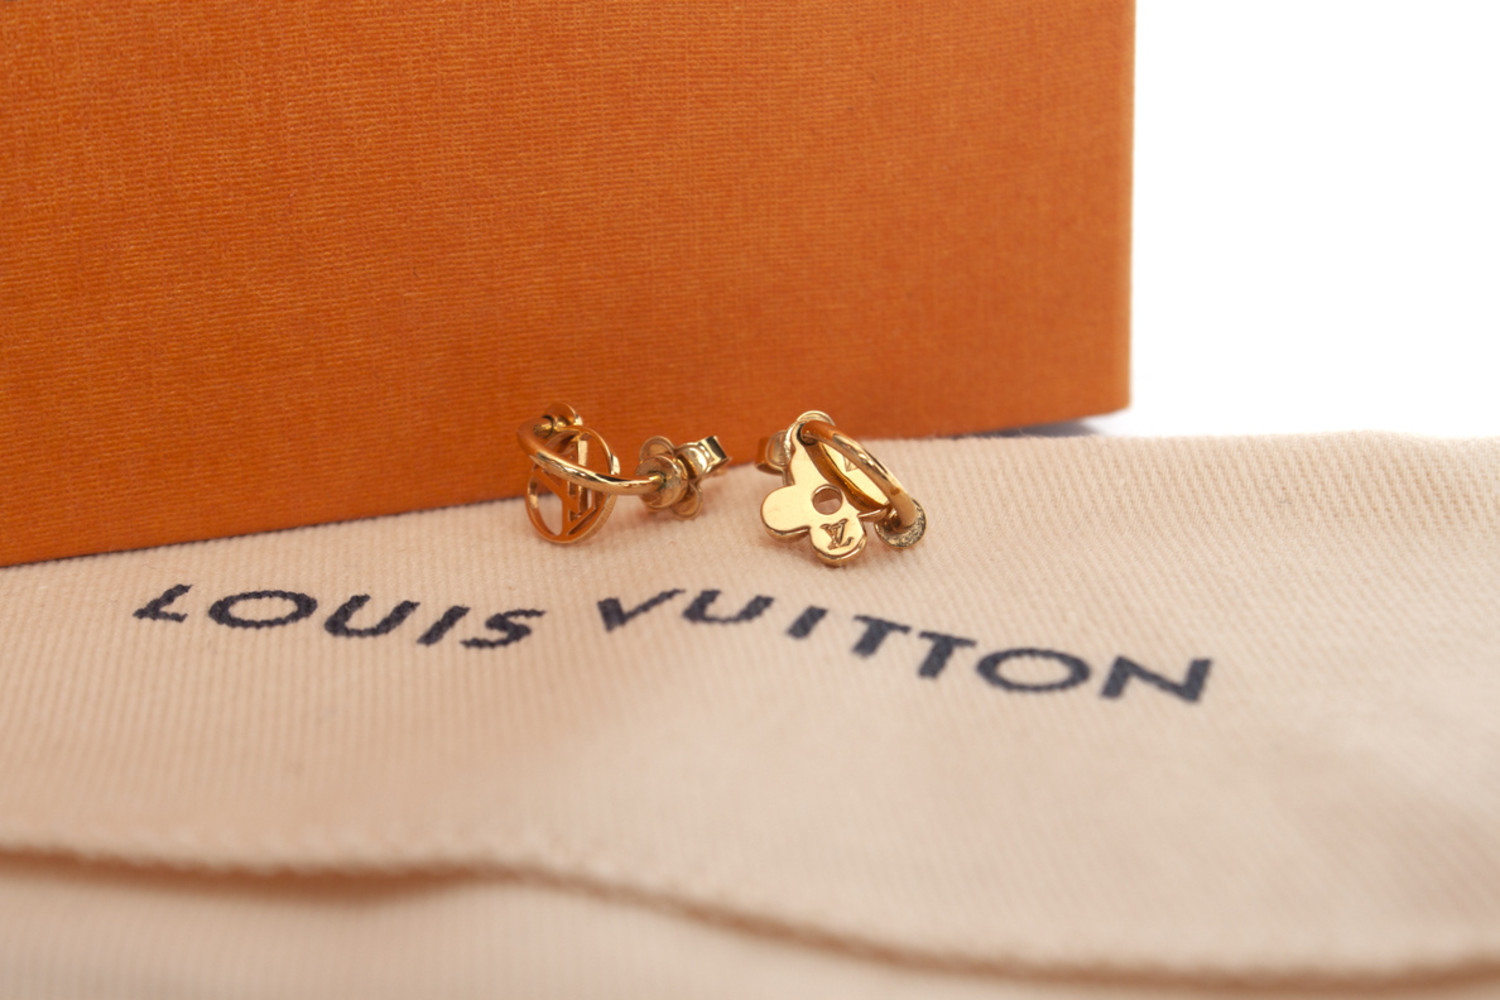 Louis Vuitton, A pair of Blooming earrings. Marked LV. - Bukowskis